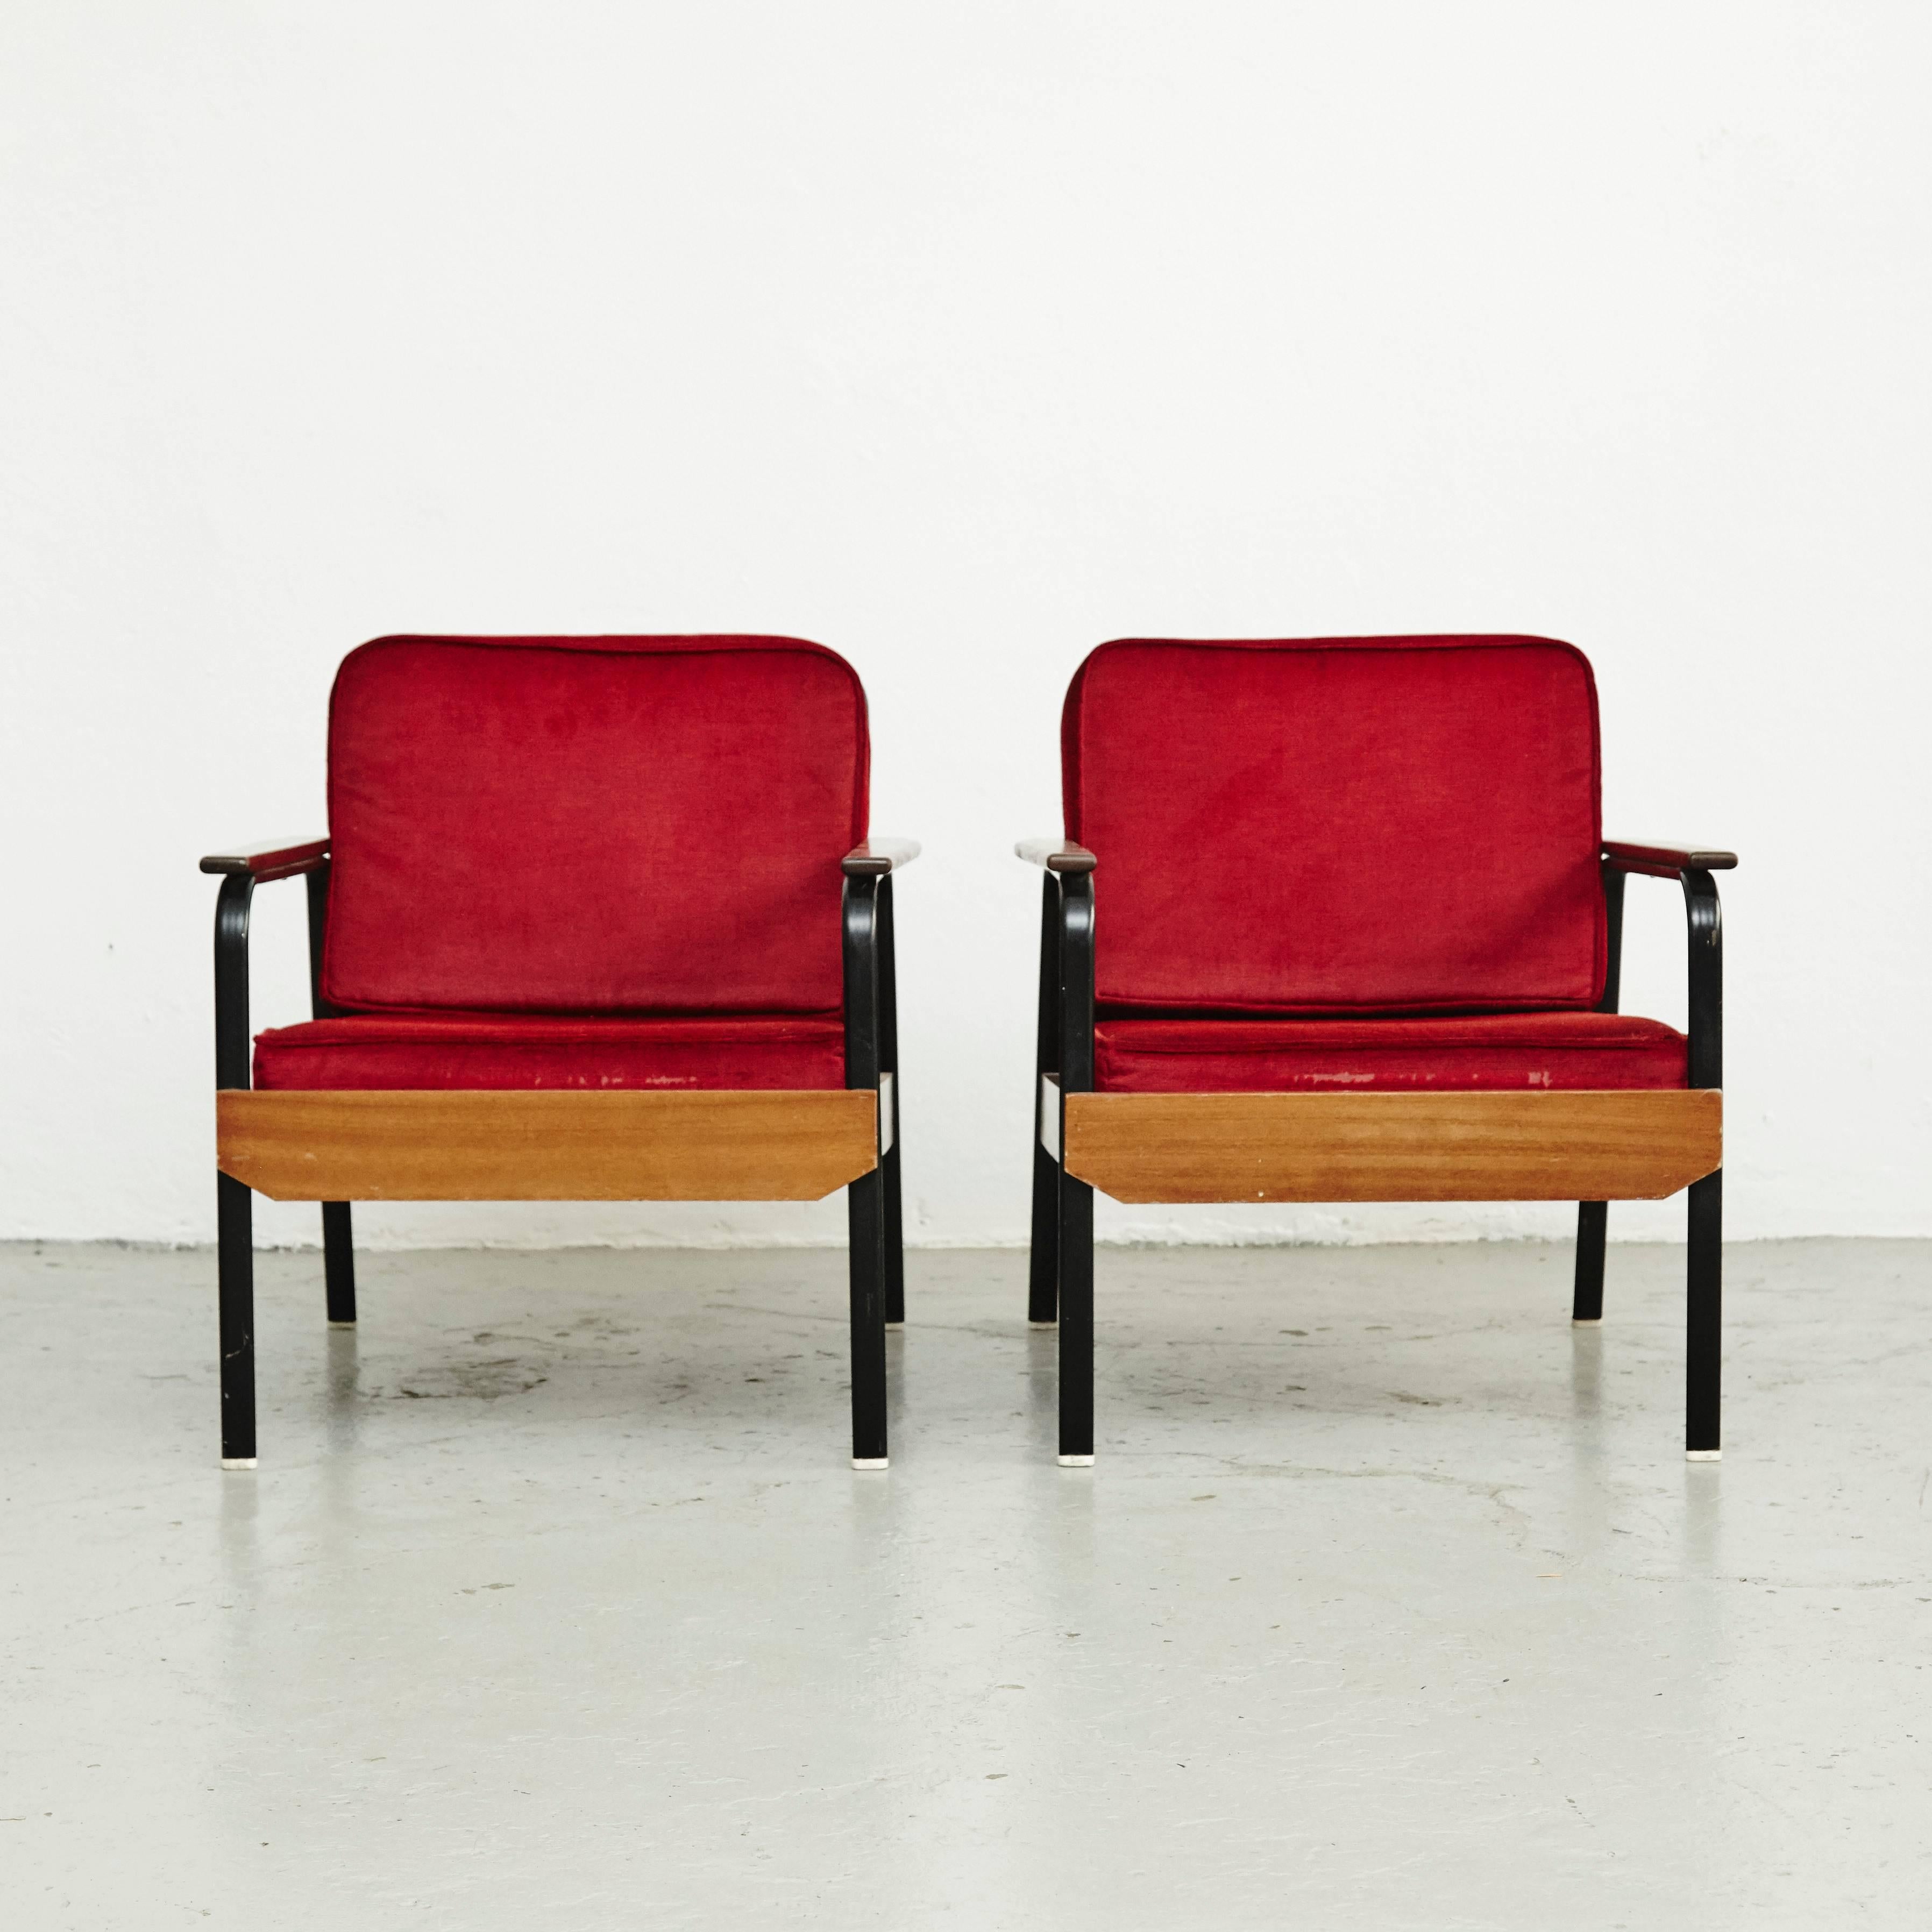 Mid-20th Century Pair of French Mid Century Modern Wood and Metal Easy Chairs after Jean Prouve